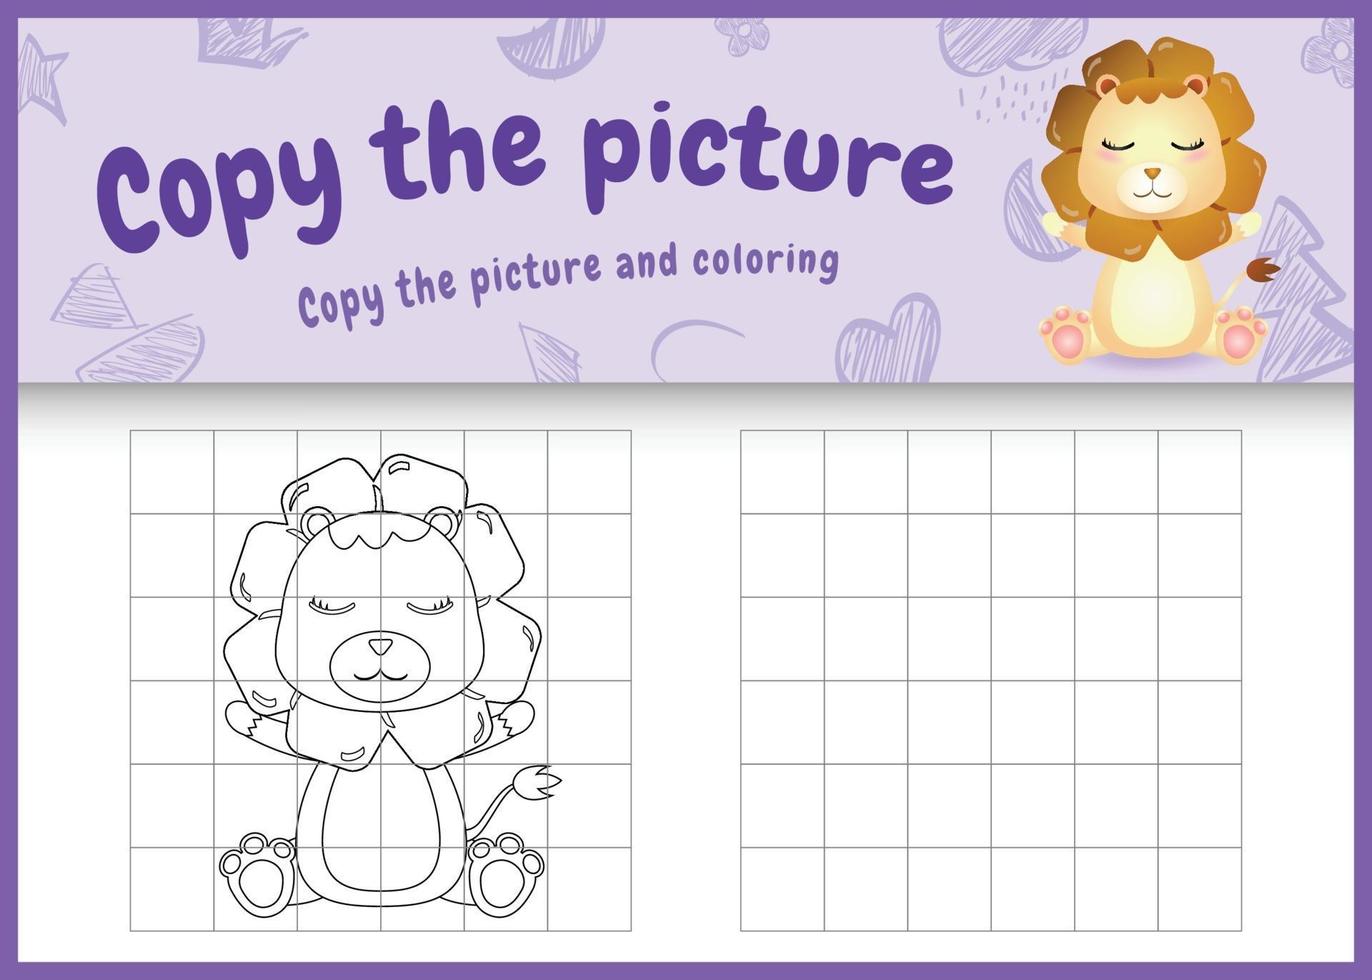 copy the picture kids game and coloring page with a cute lion character illustration vector